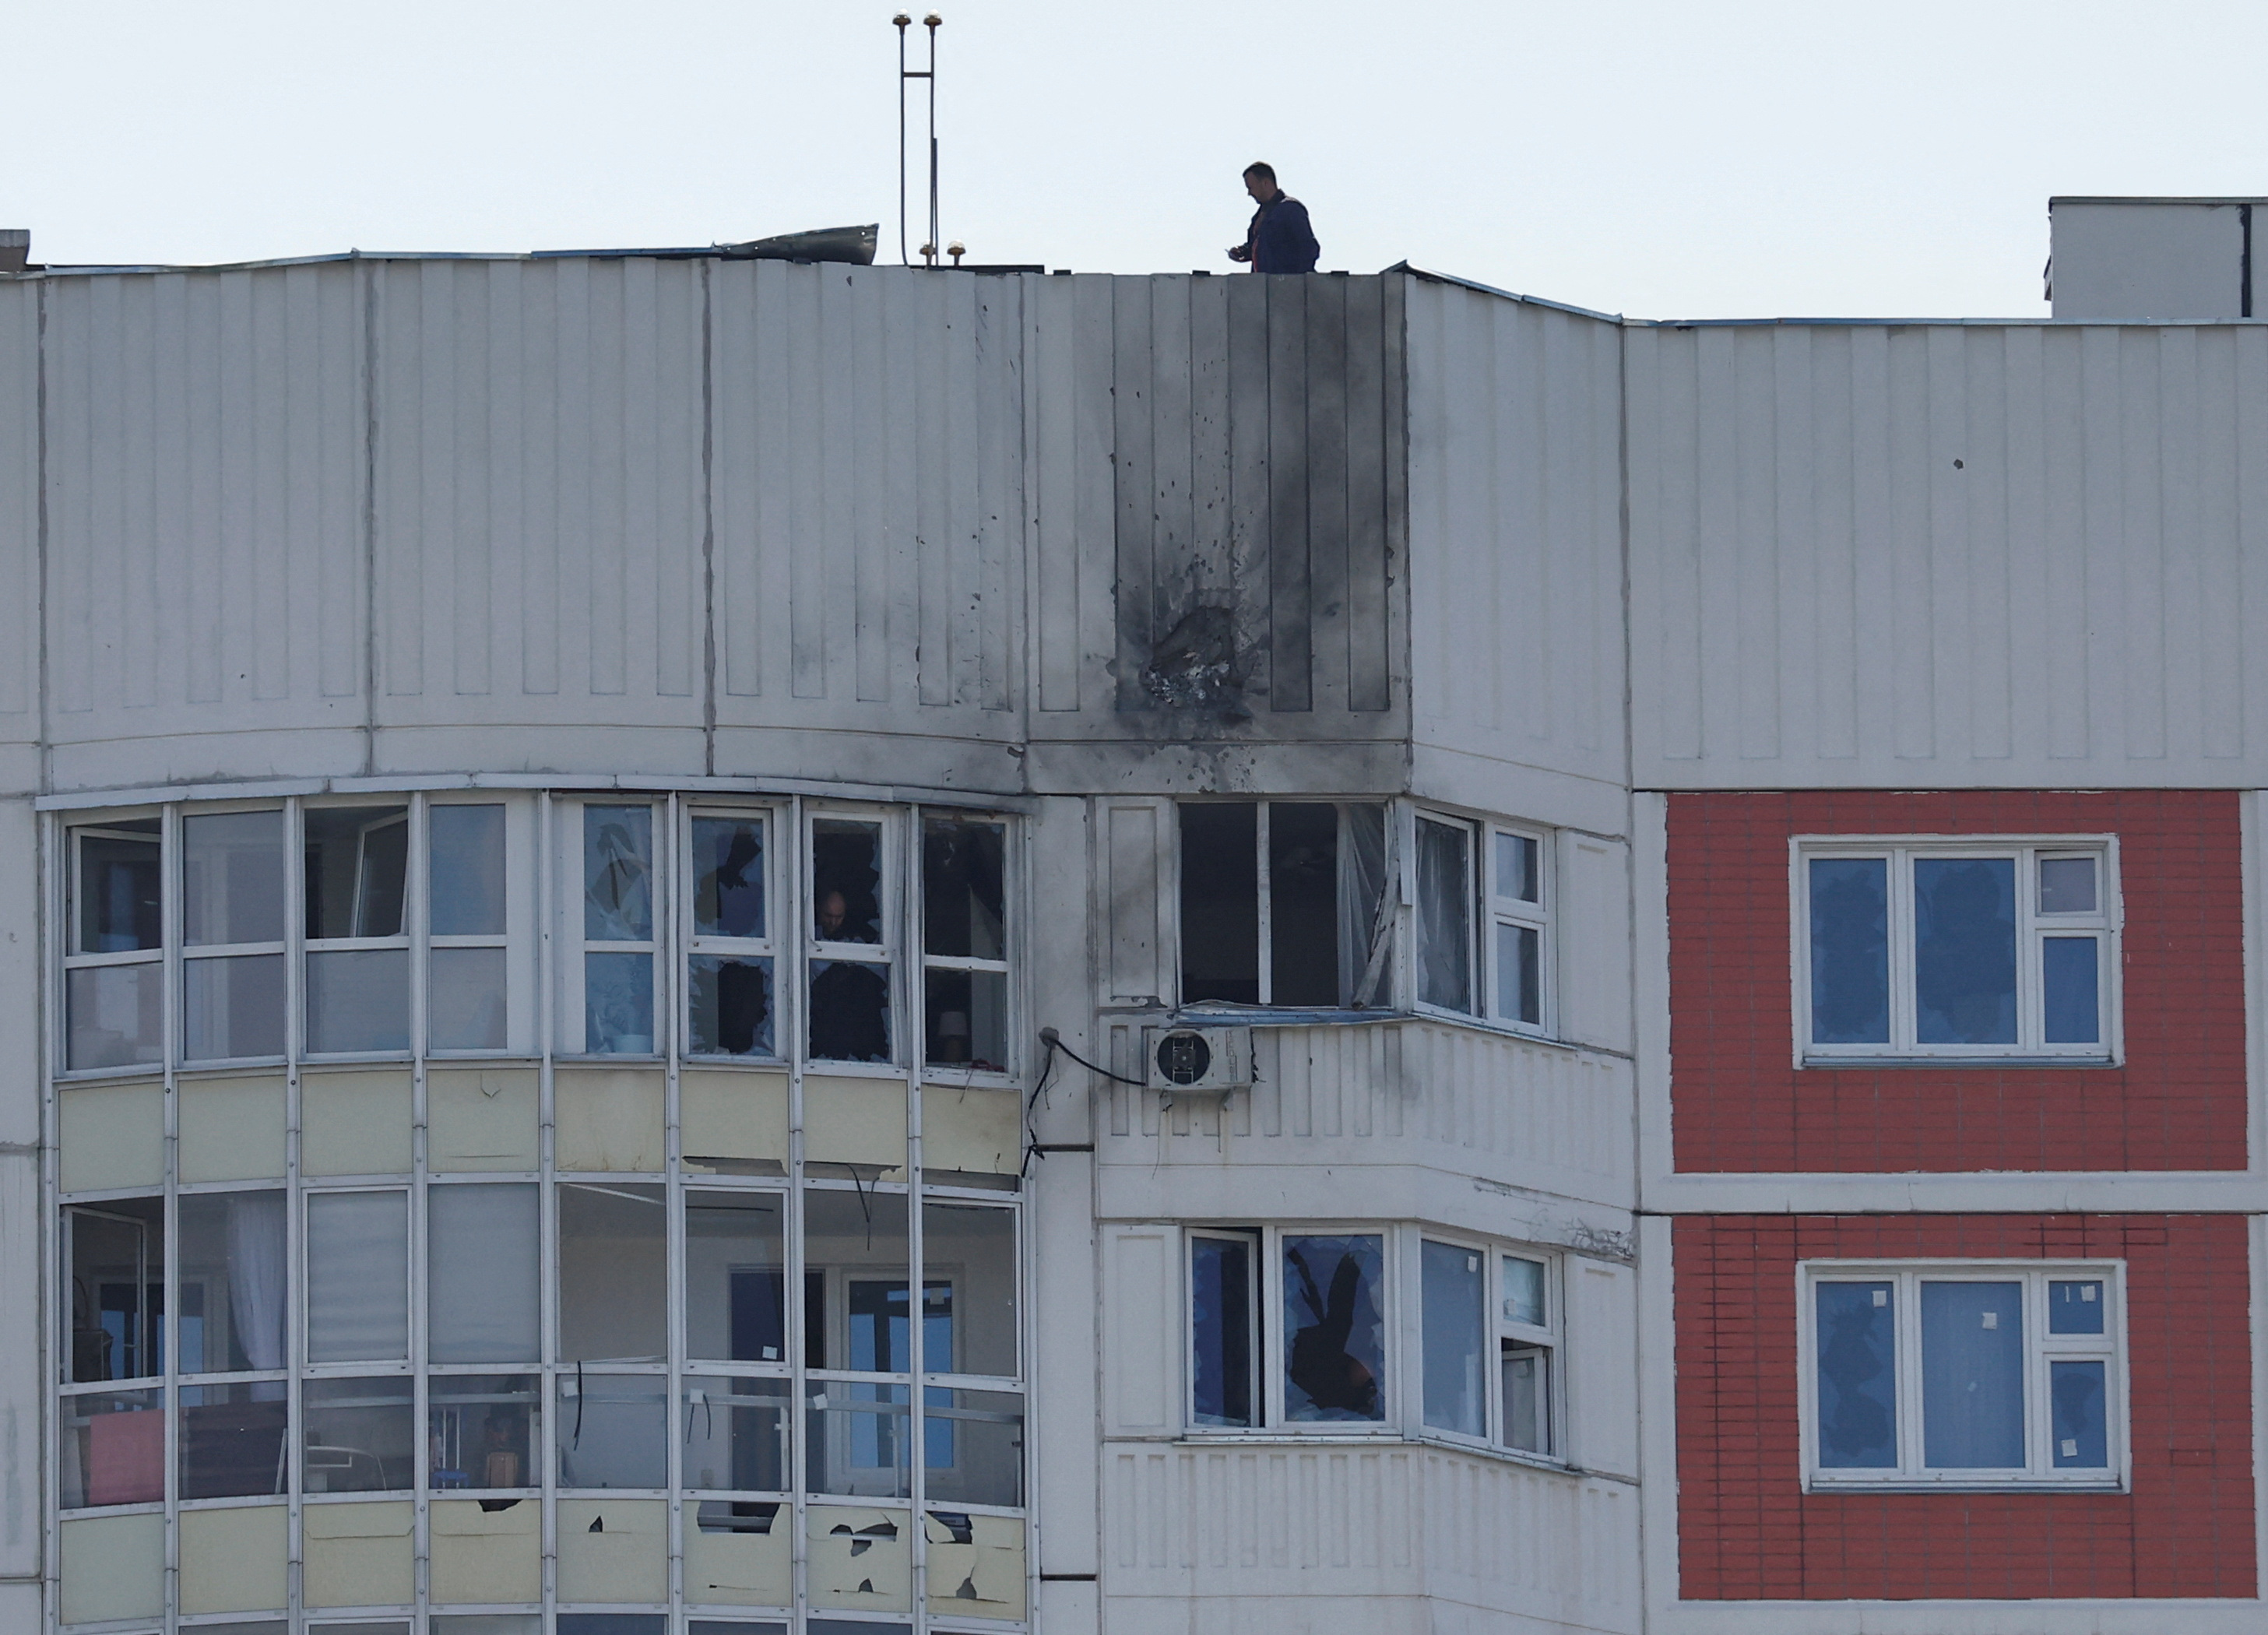 Drones reportedly hit buildings in Moscow